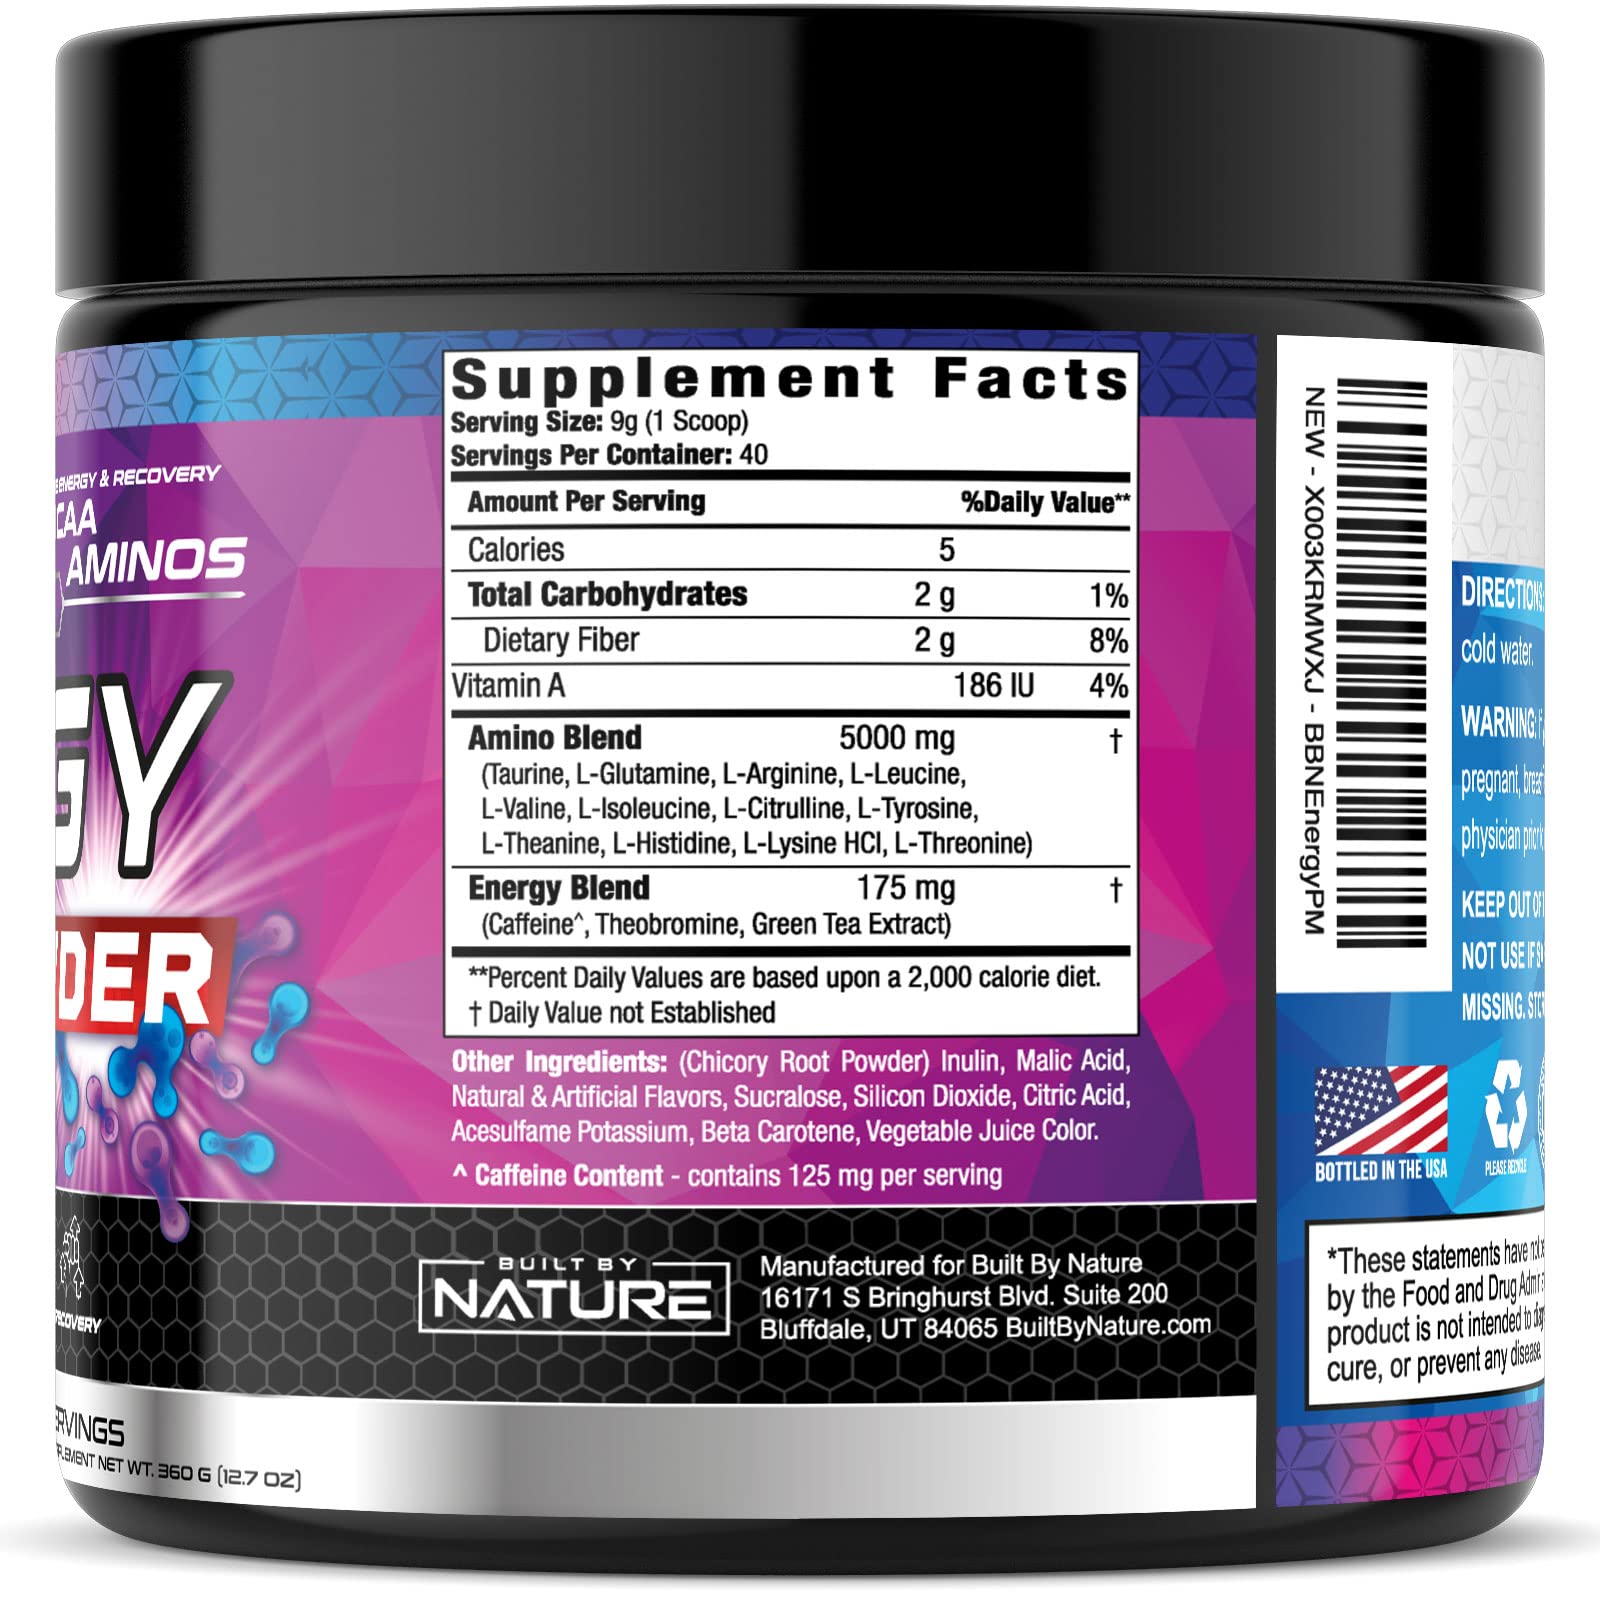 Energy Drink Powder - Zero Sugar, Enriched with BCAA, Taurine, Amino Acids & Green Tea Extract, Amino Energy Pre Workout Performance Booster & Brain Fuel Supplement, Peach Mango Flavor, 40 Servings